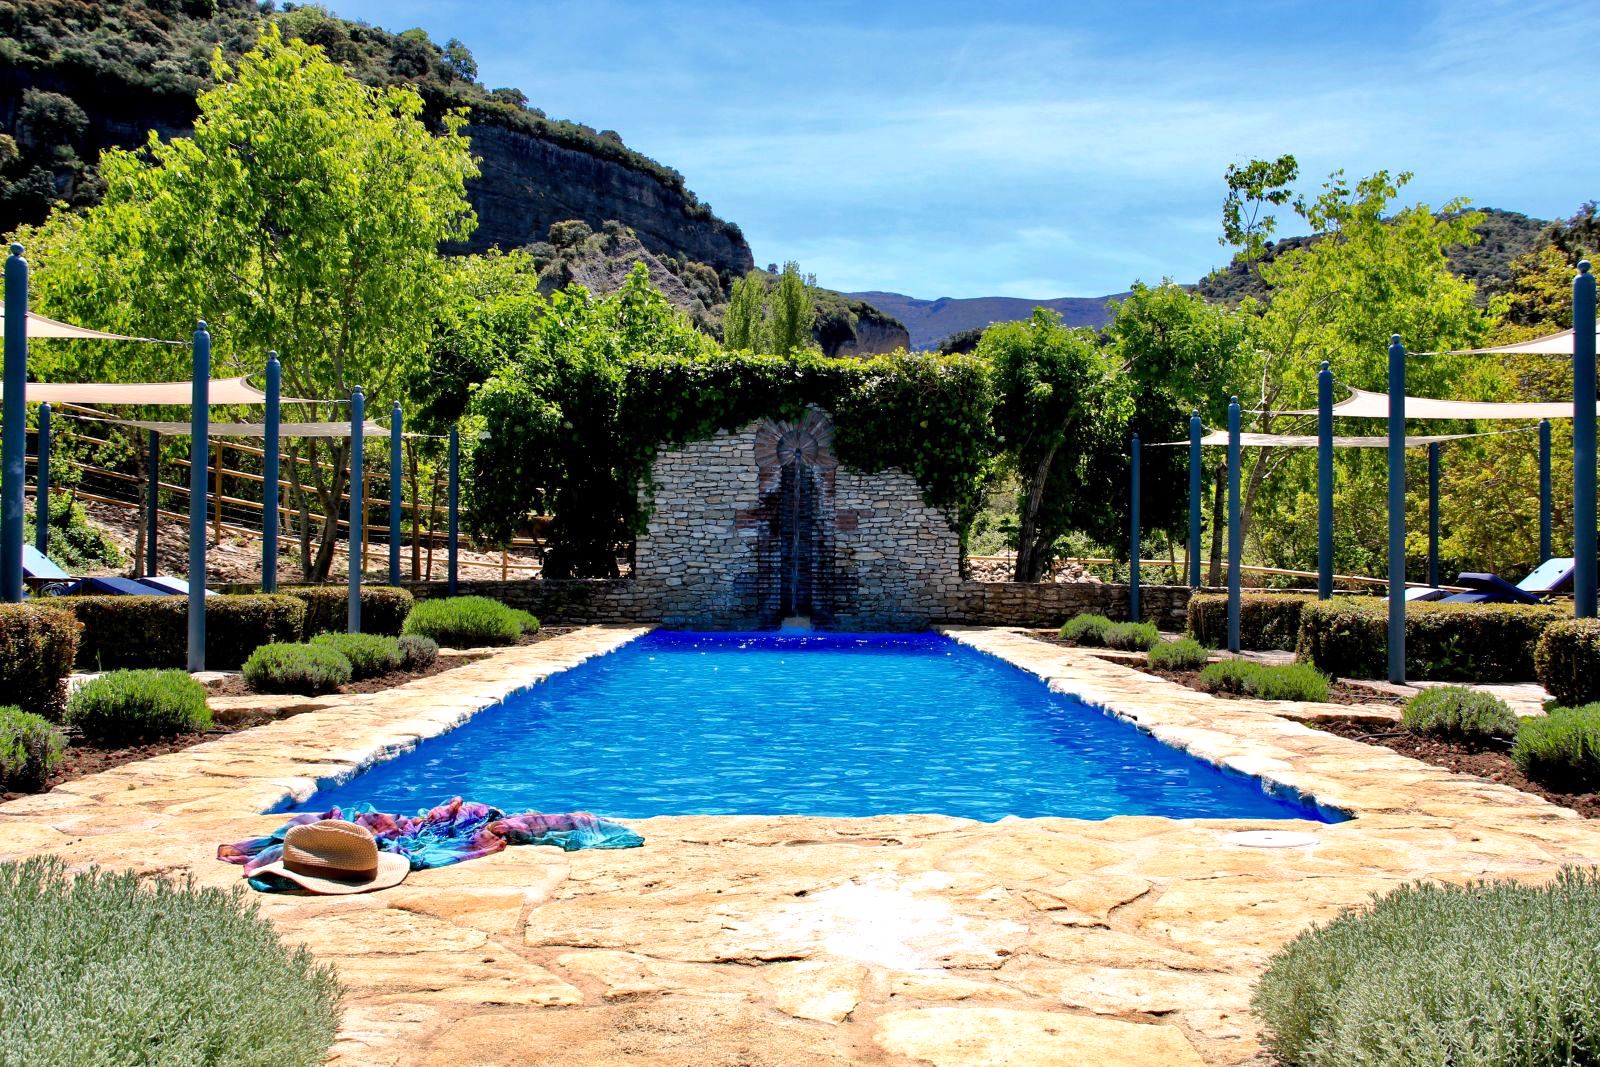 swimming pool with fountain in a stone wall with hills behind at villa Casa de Valle in Andalucia, Spain